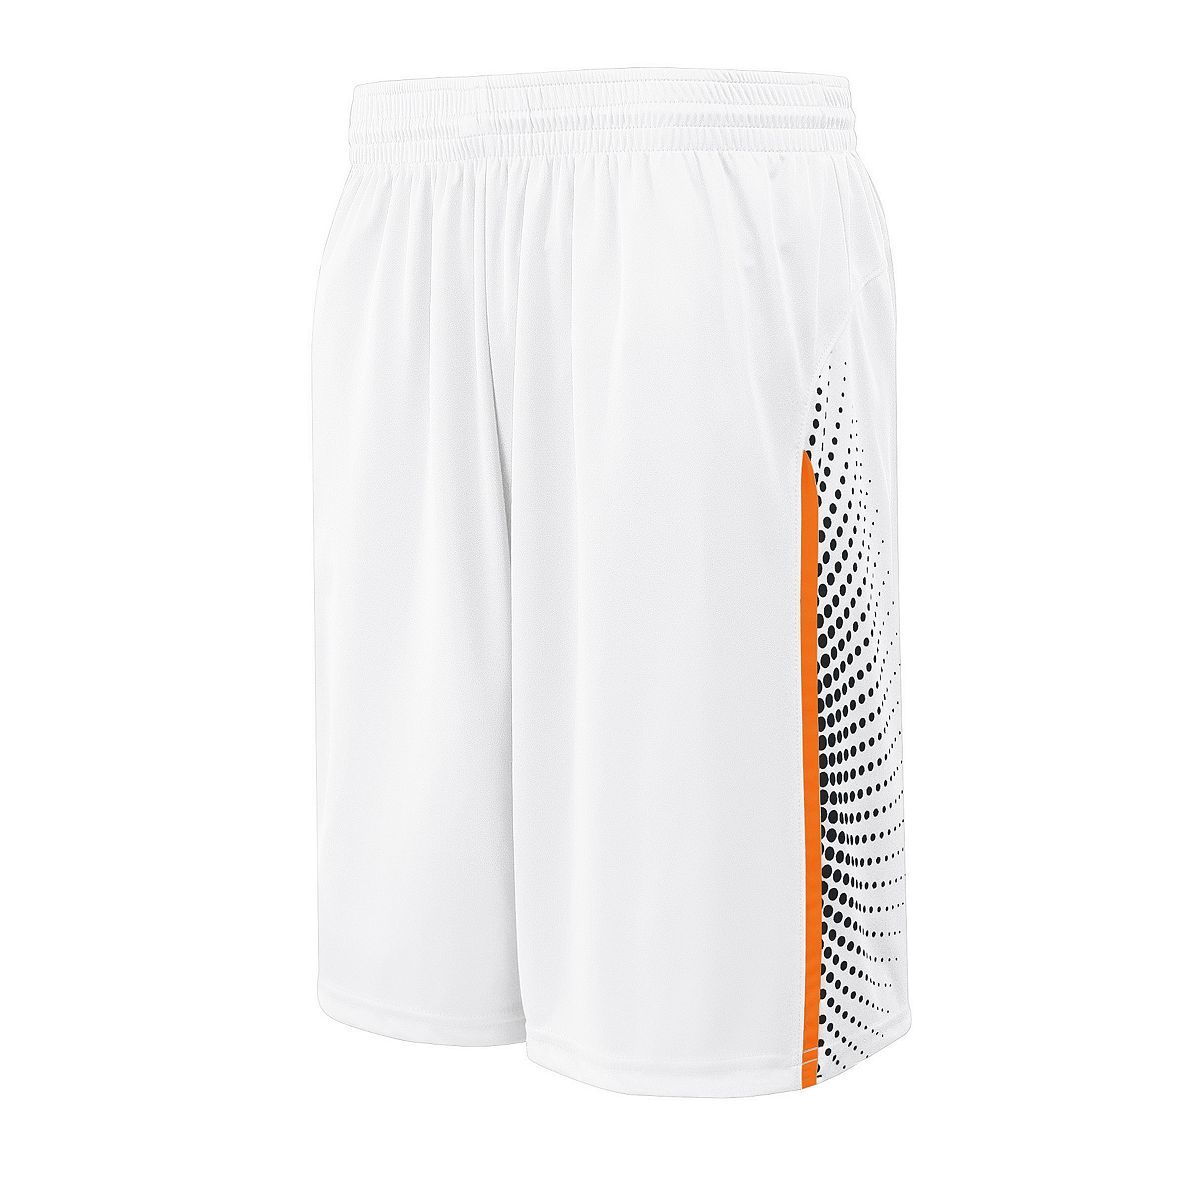 High 5 Comet Shorts in White/Orange/Black  -Part of the Adult, Adult-Shorts, High5-Products, Basketball, All-Sports, All-Sports-1 product lines at KanaleyCreations.com